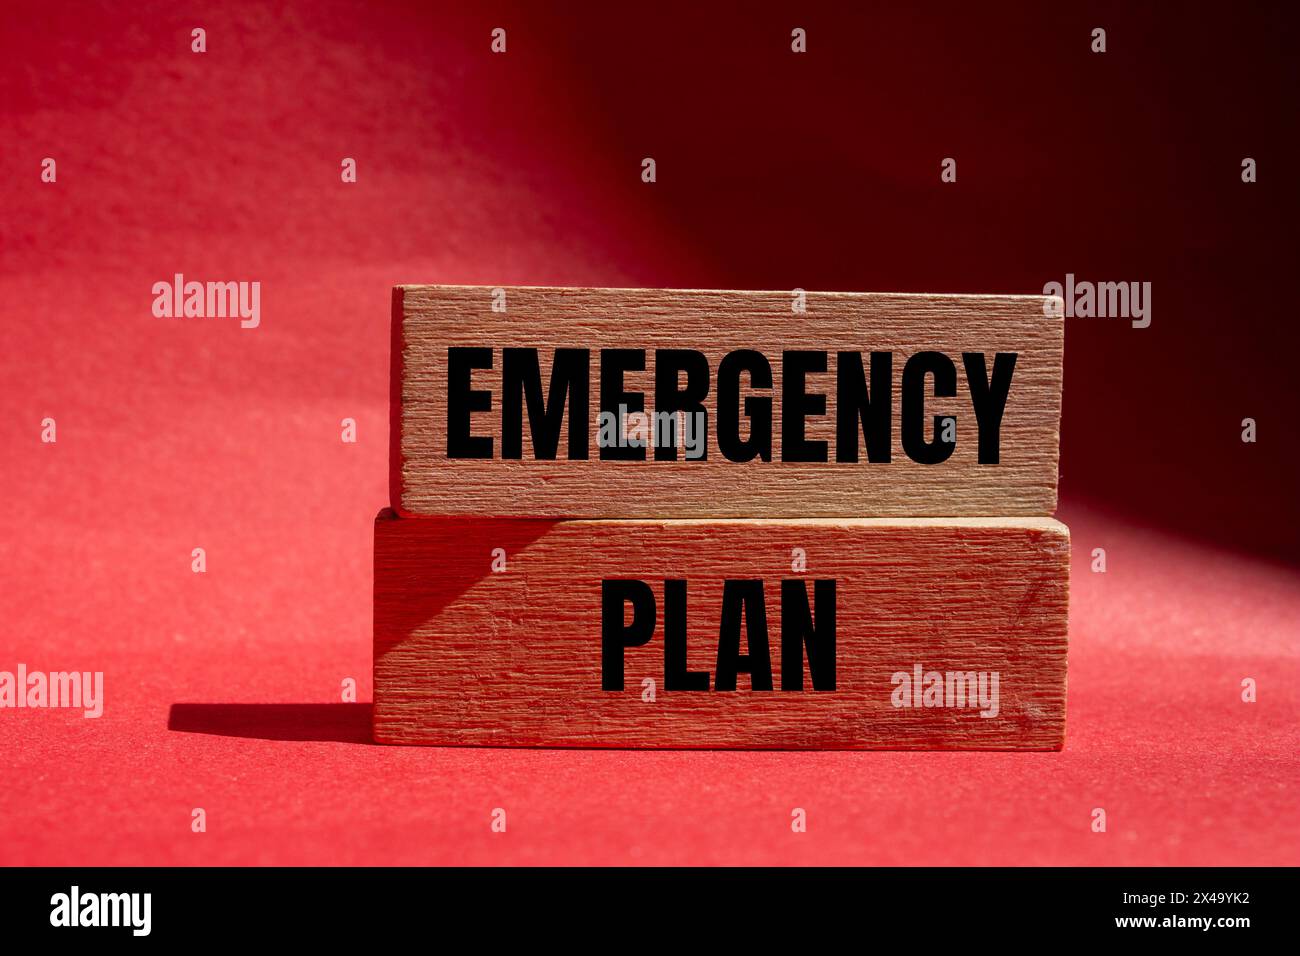 Emergency plan words written on wooden blocks with red background. Conceptual emergency plan symbol. Copy space. Stock Photo